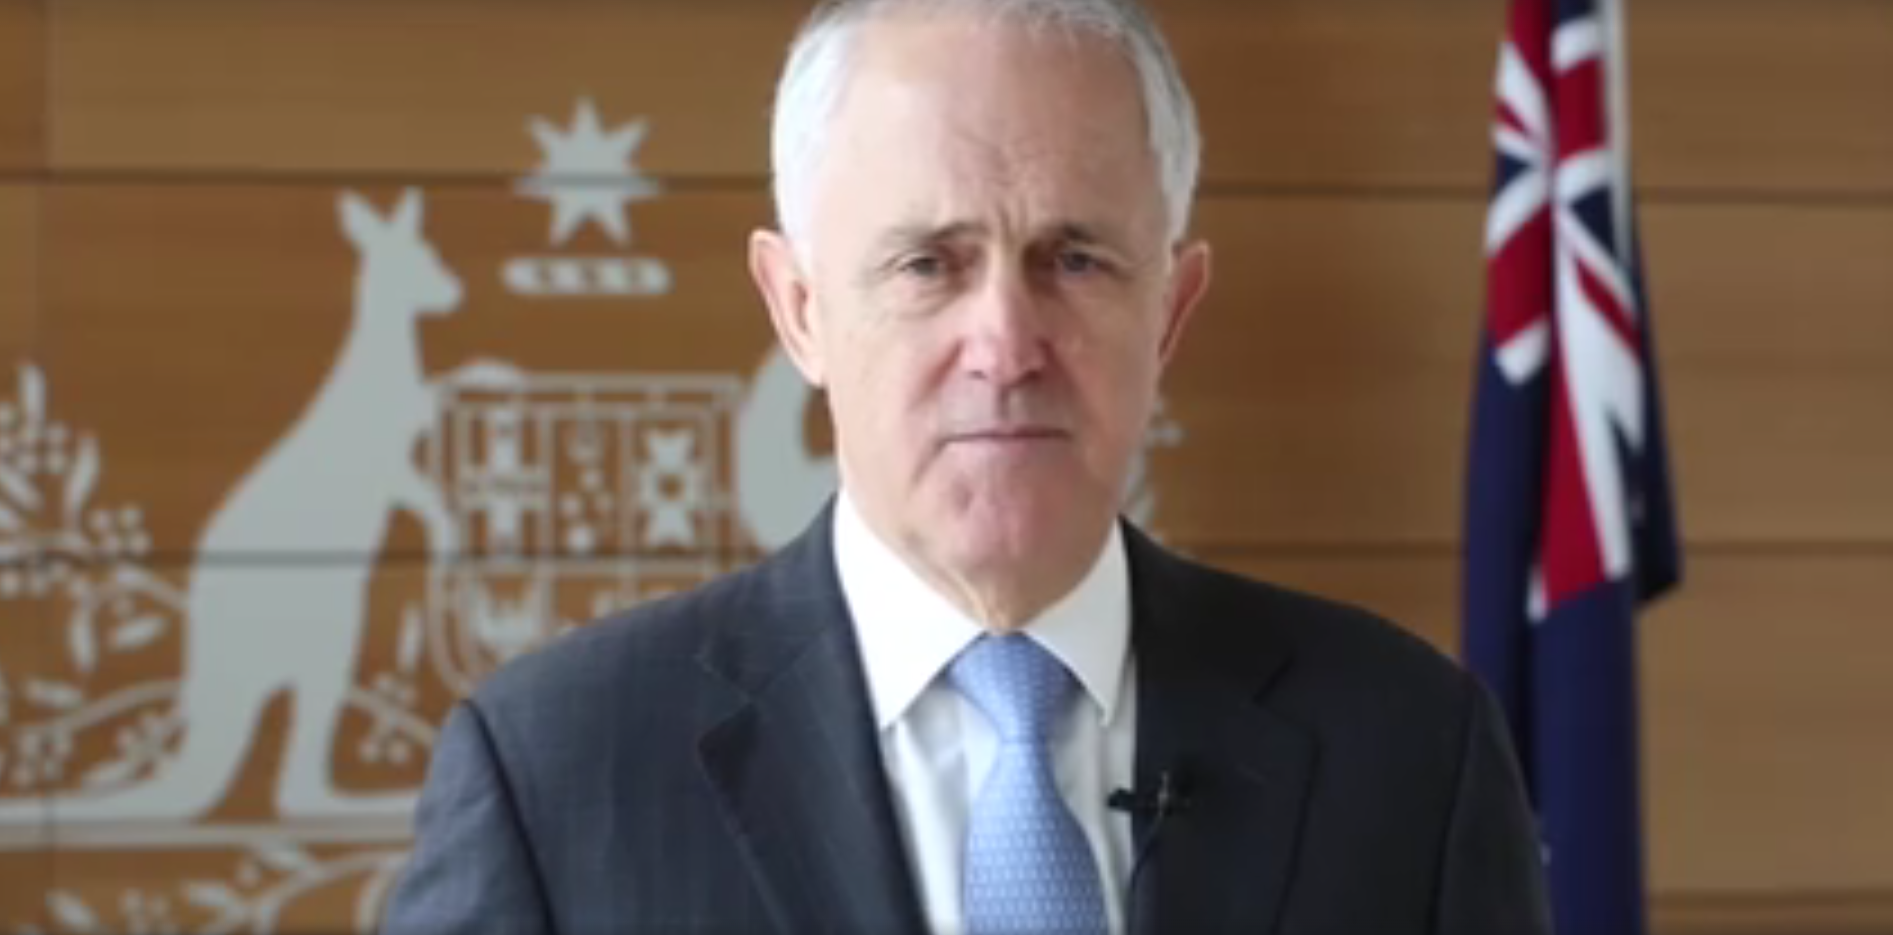 Malcolm Turnbull: I’m voting yes because this is a question of fairness